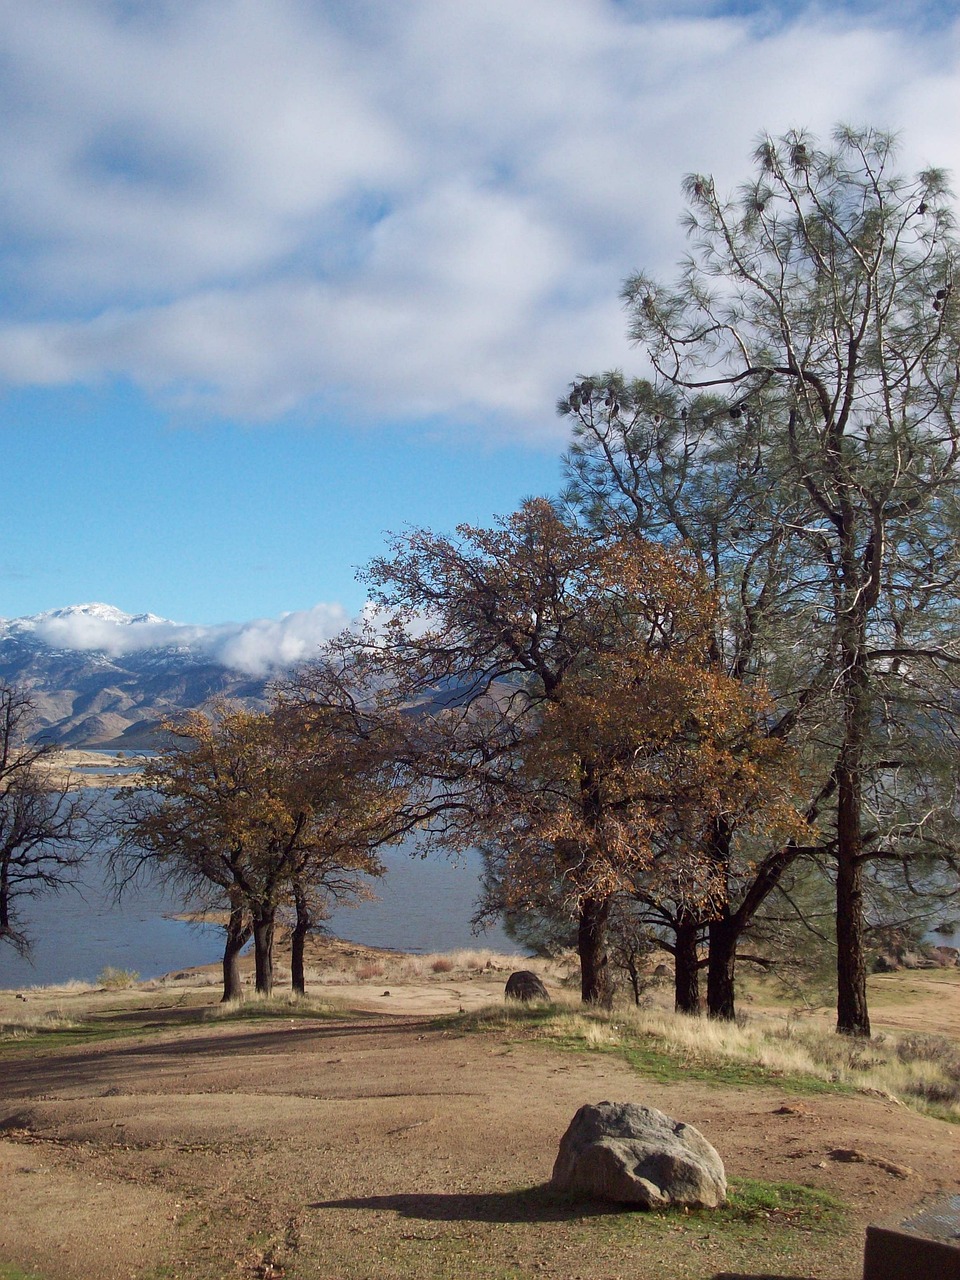 5-Day Lake Isabella Adventure with Scenic Views and Local Flavors